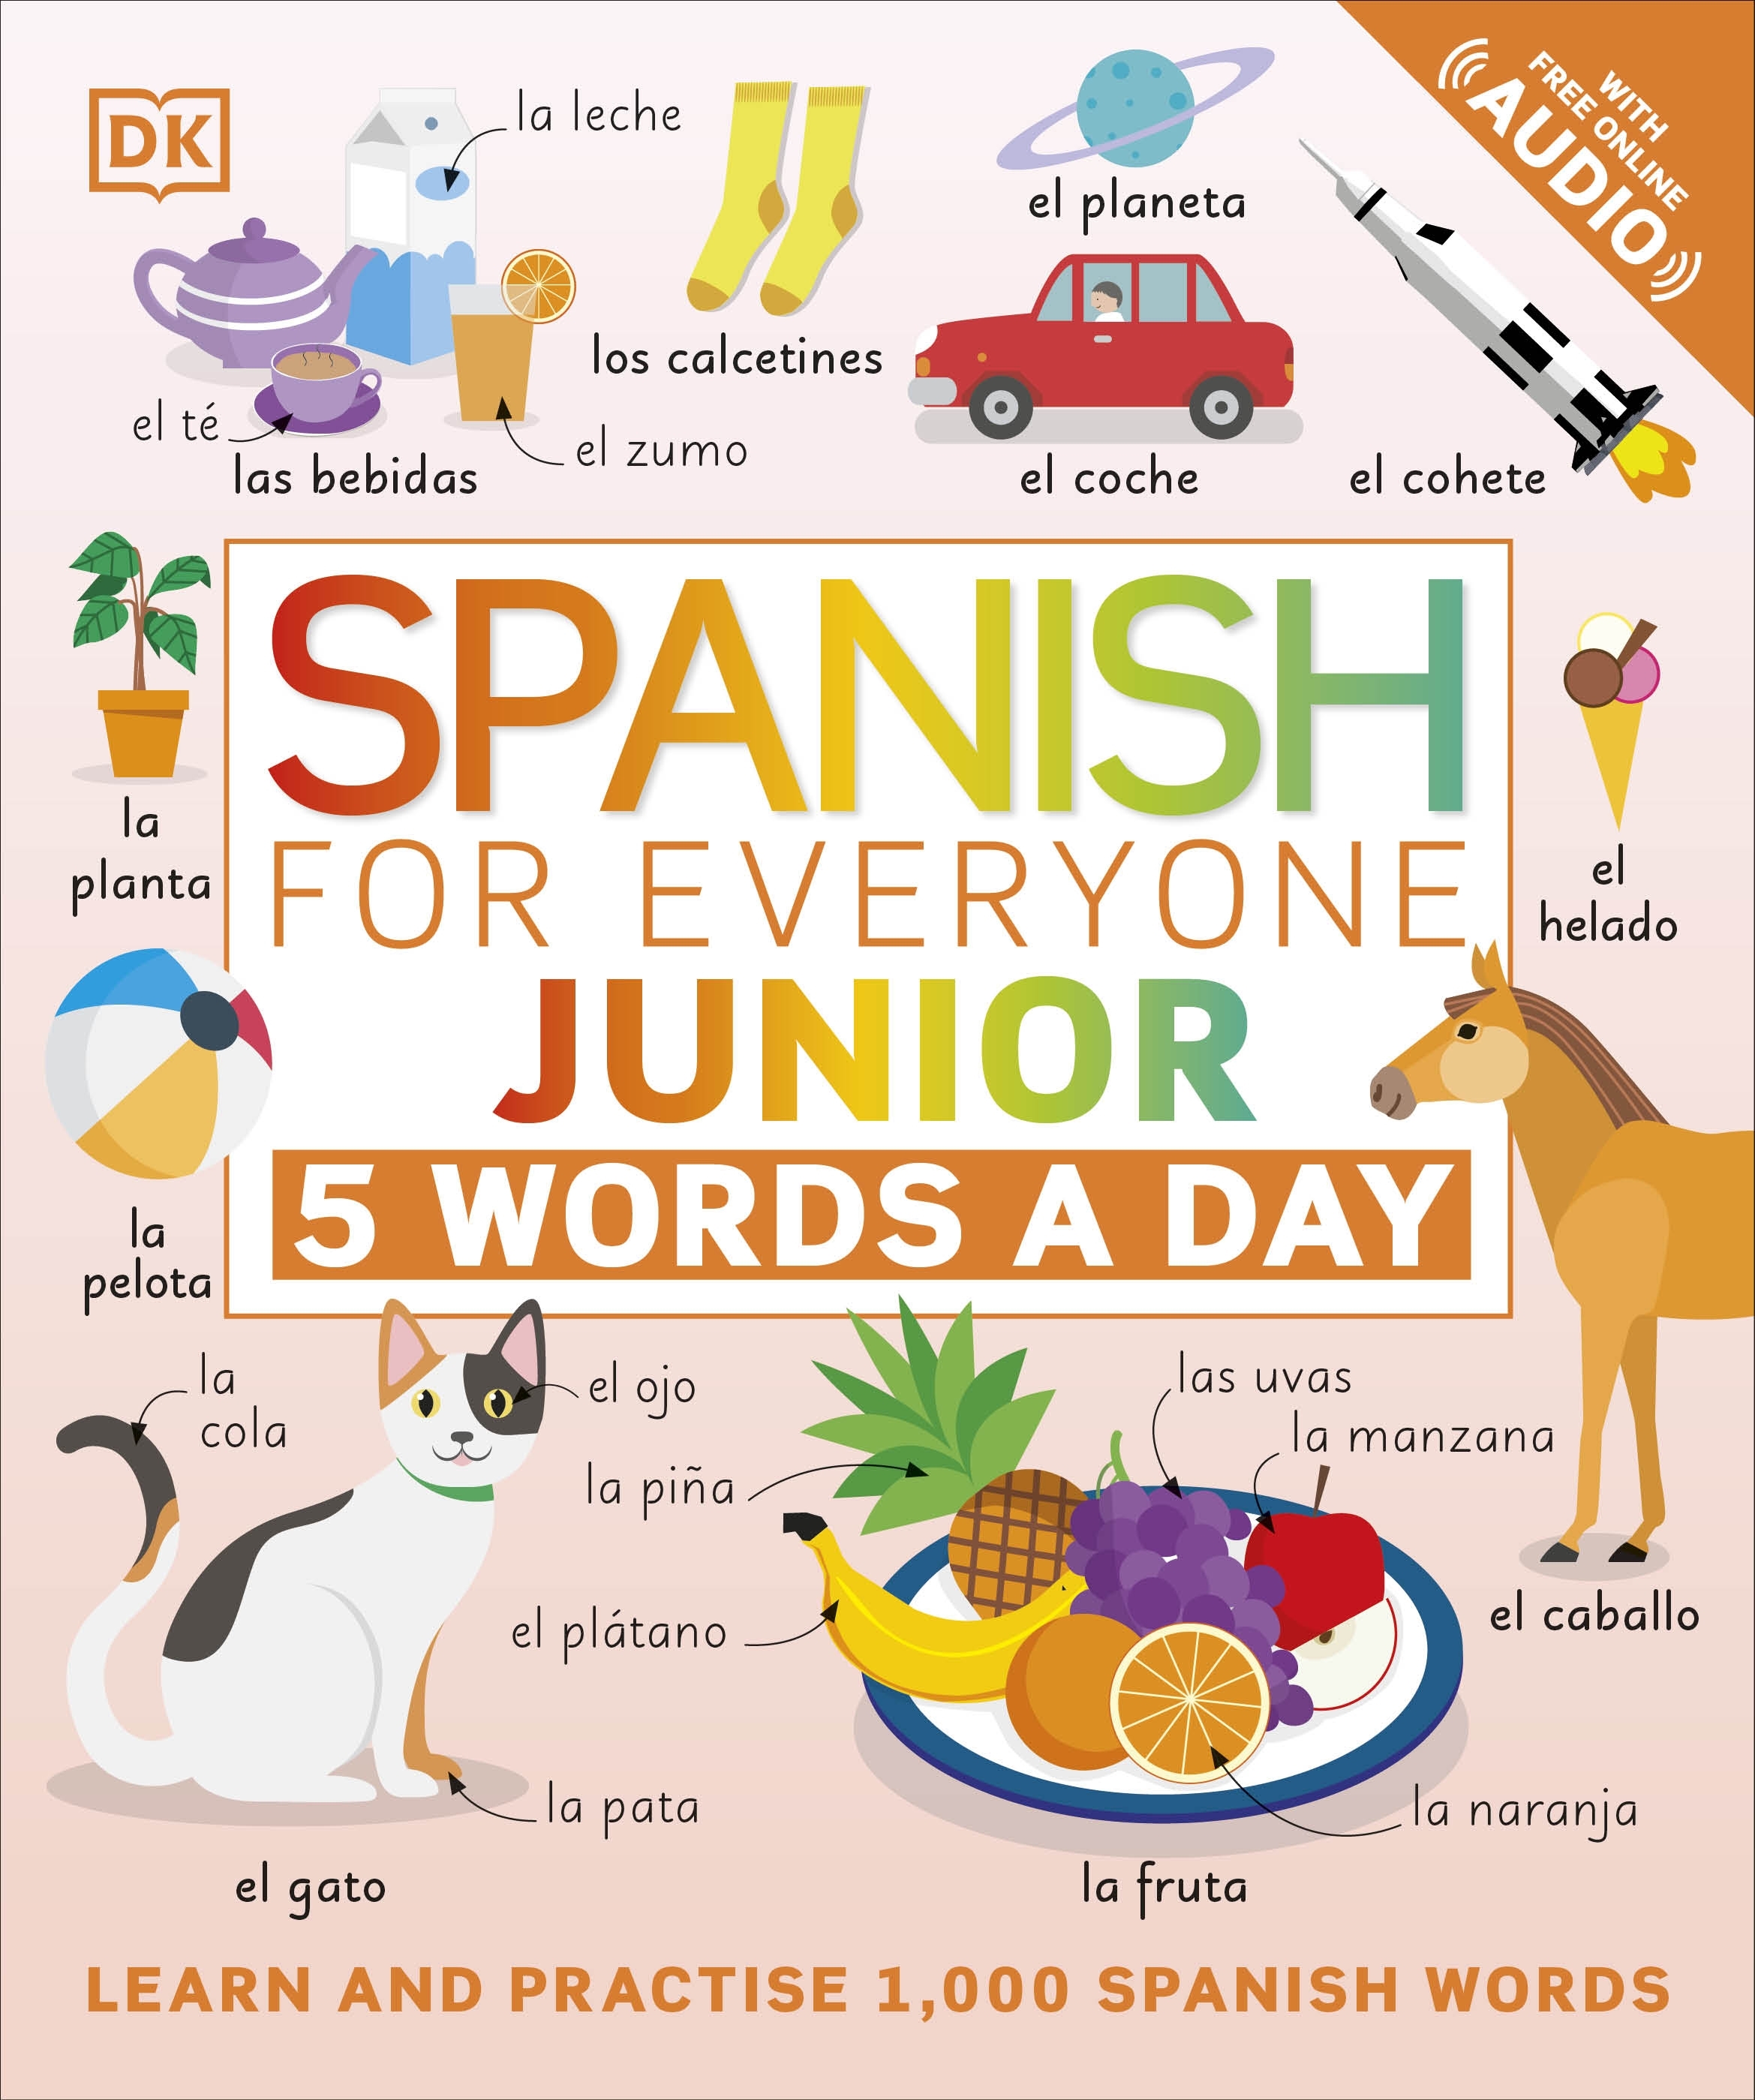 spanish-for-everyone-junior-5-words-a-day-by-dk-penguin-books-new-zealand